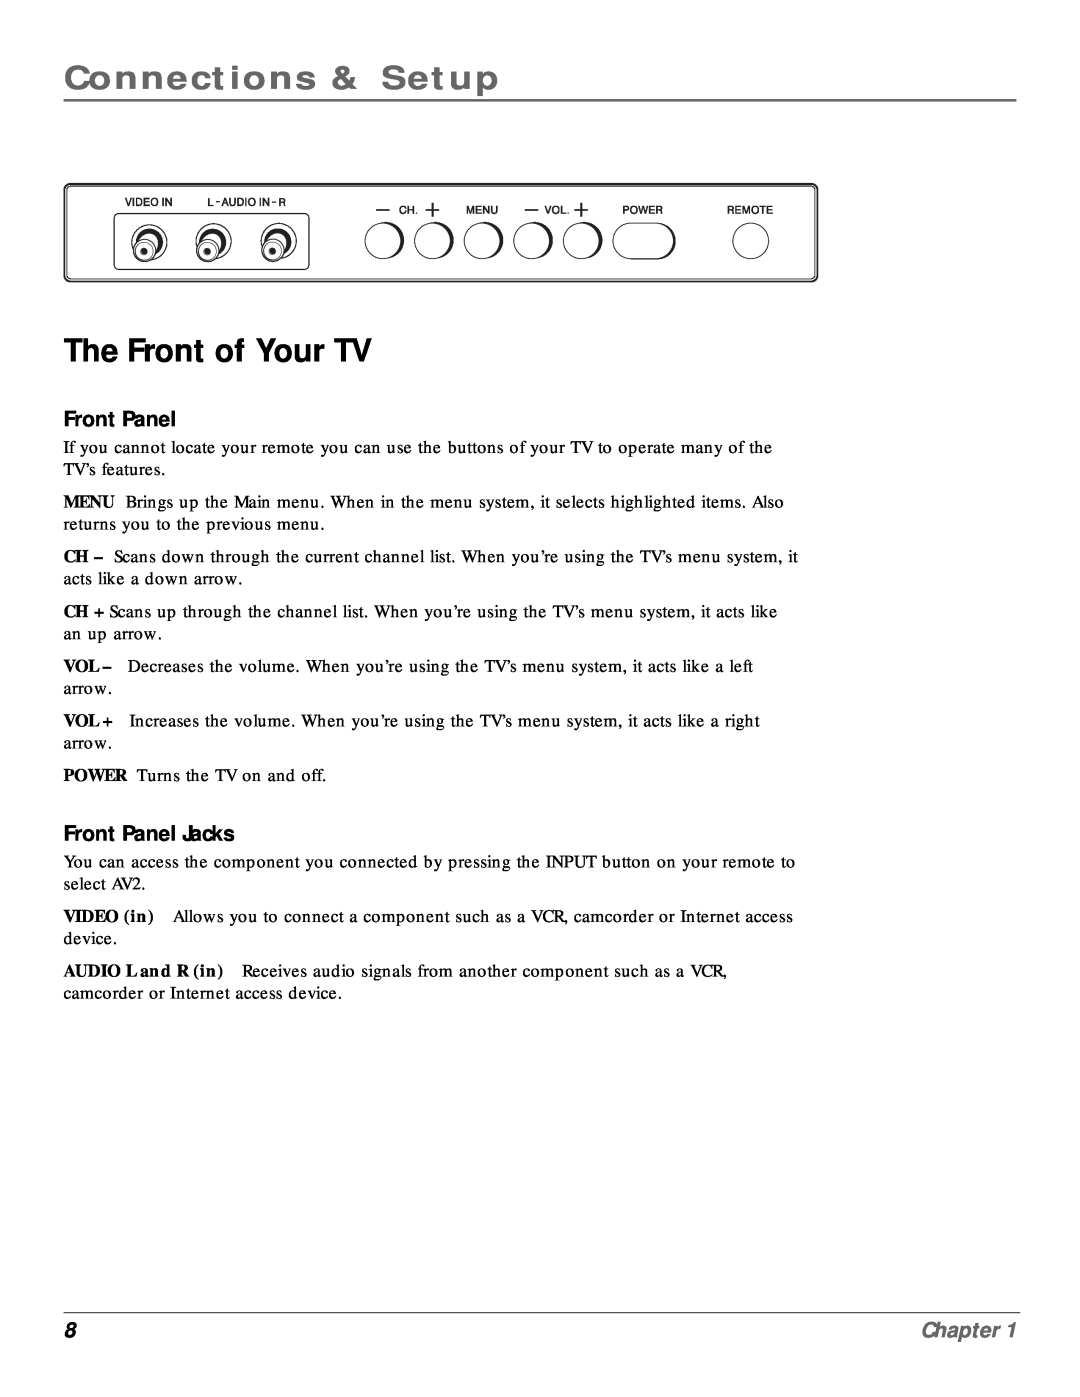 RCA CR20310 manual The Front of Your TV, Front Panel Jacks, Connections & Setup, Chapter 